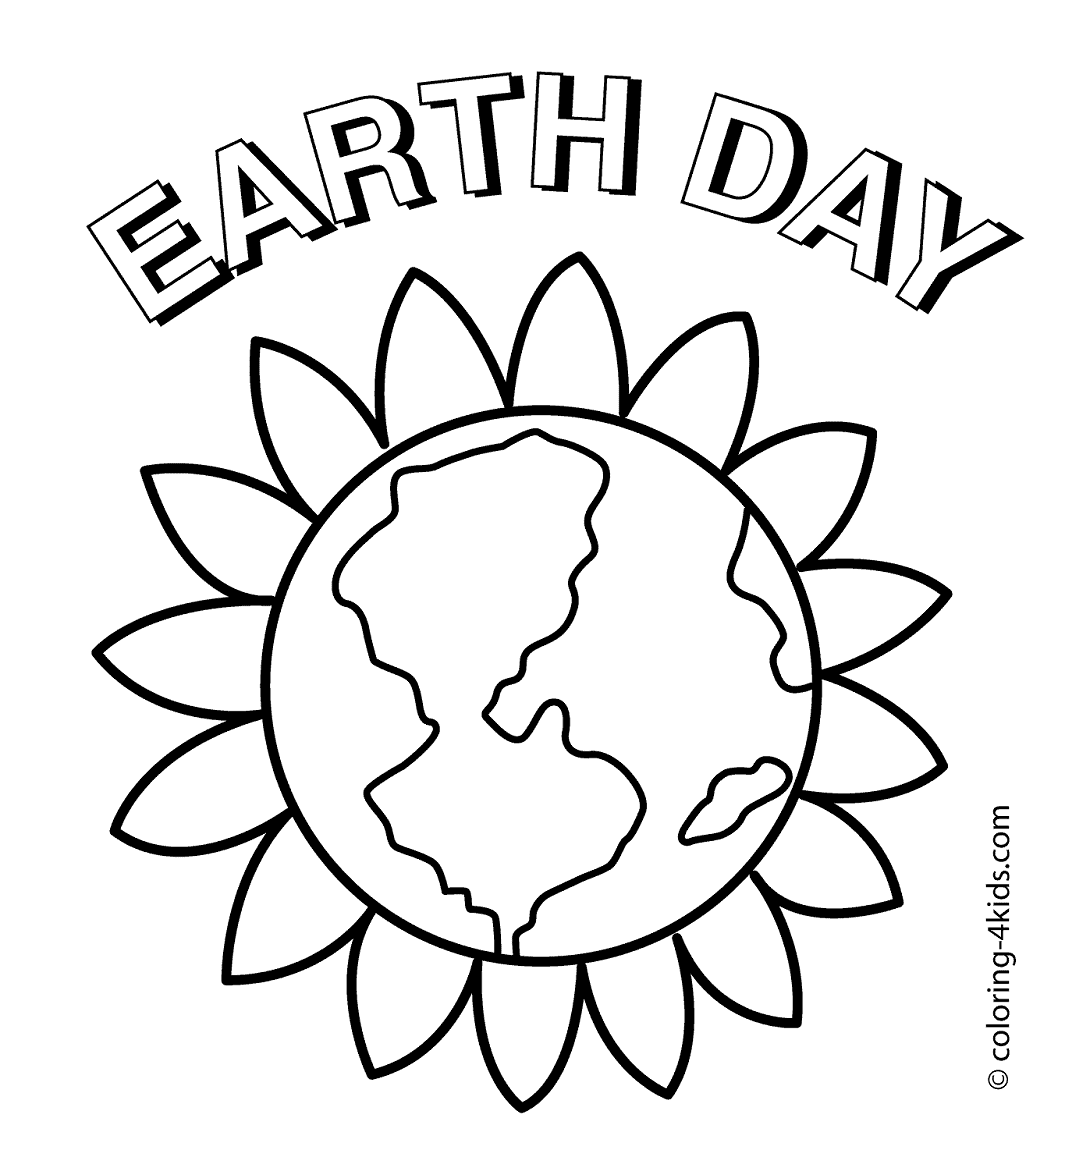 Earth Day Flower Coloring Page